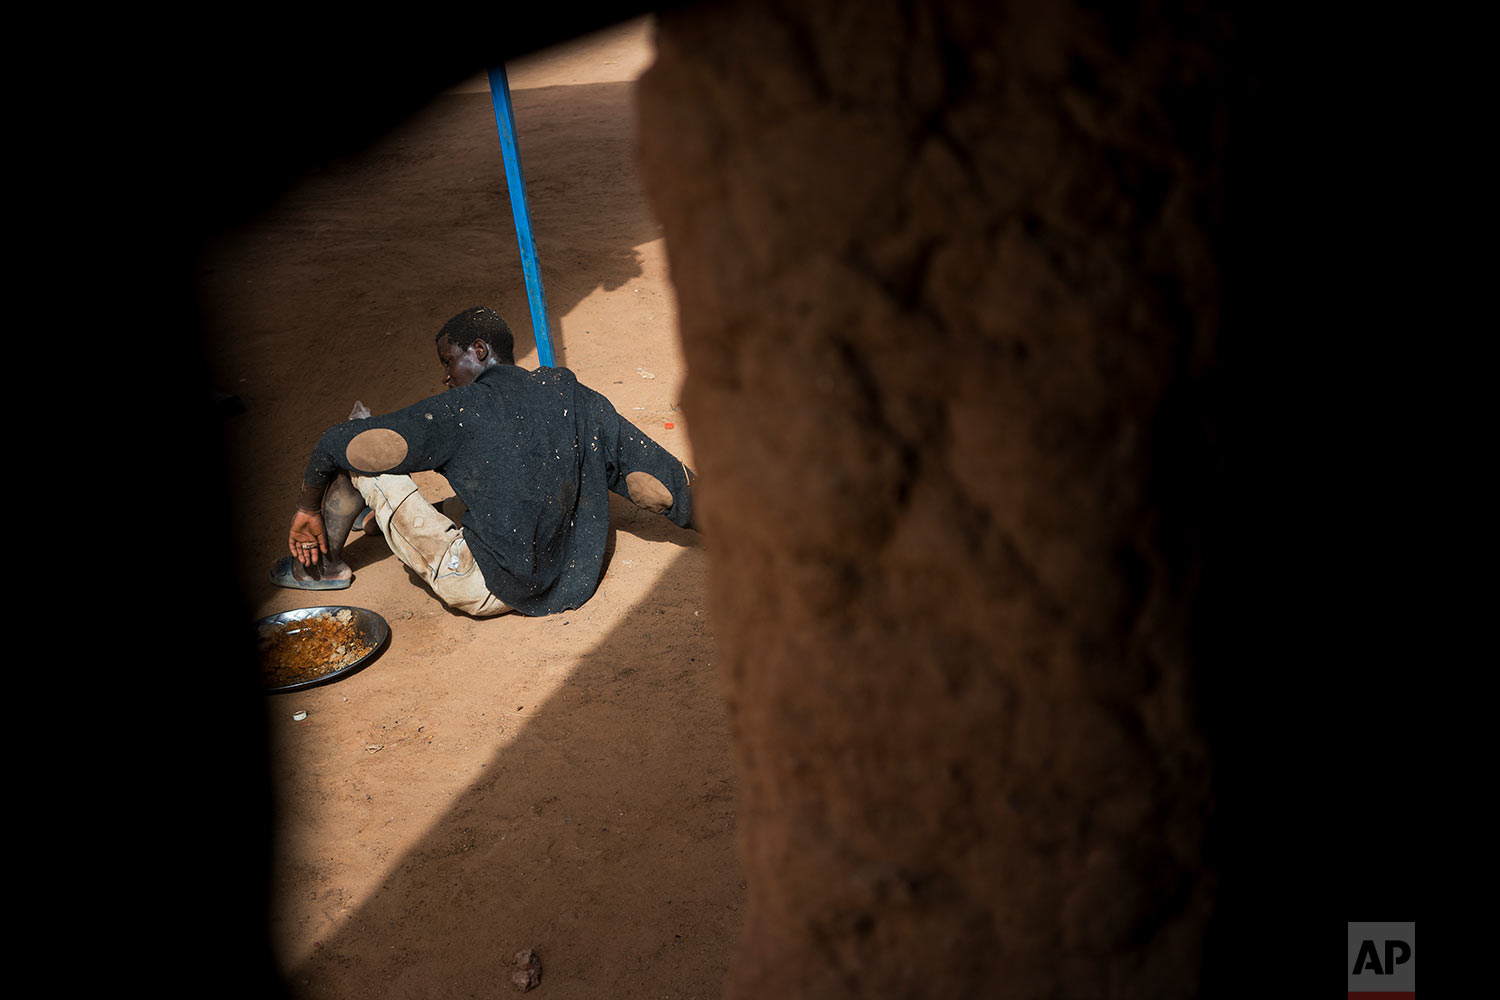  A young migrant who has been expelled from Algeria sits in a transit center in Arlit, Niger, on June 1, 2018. (AP Photo/Jerome Delay) 